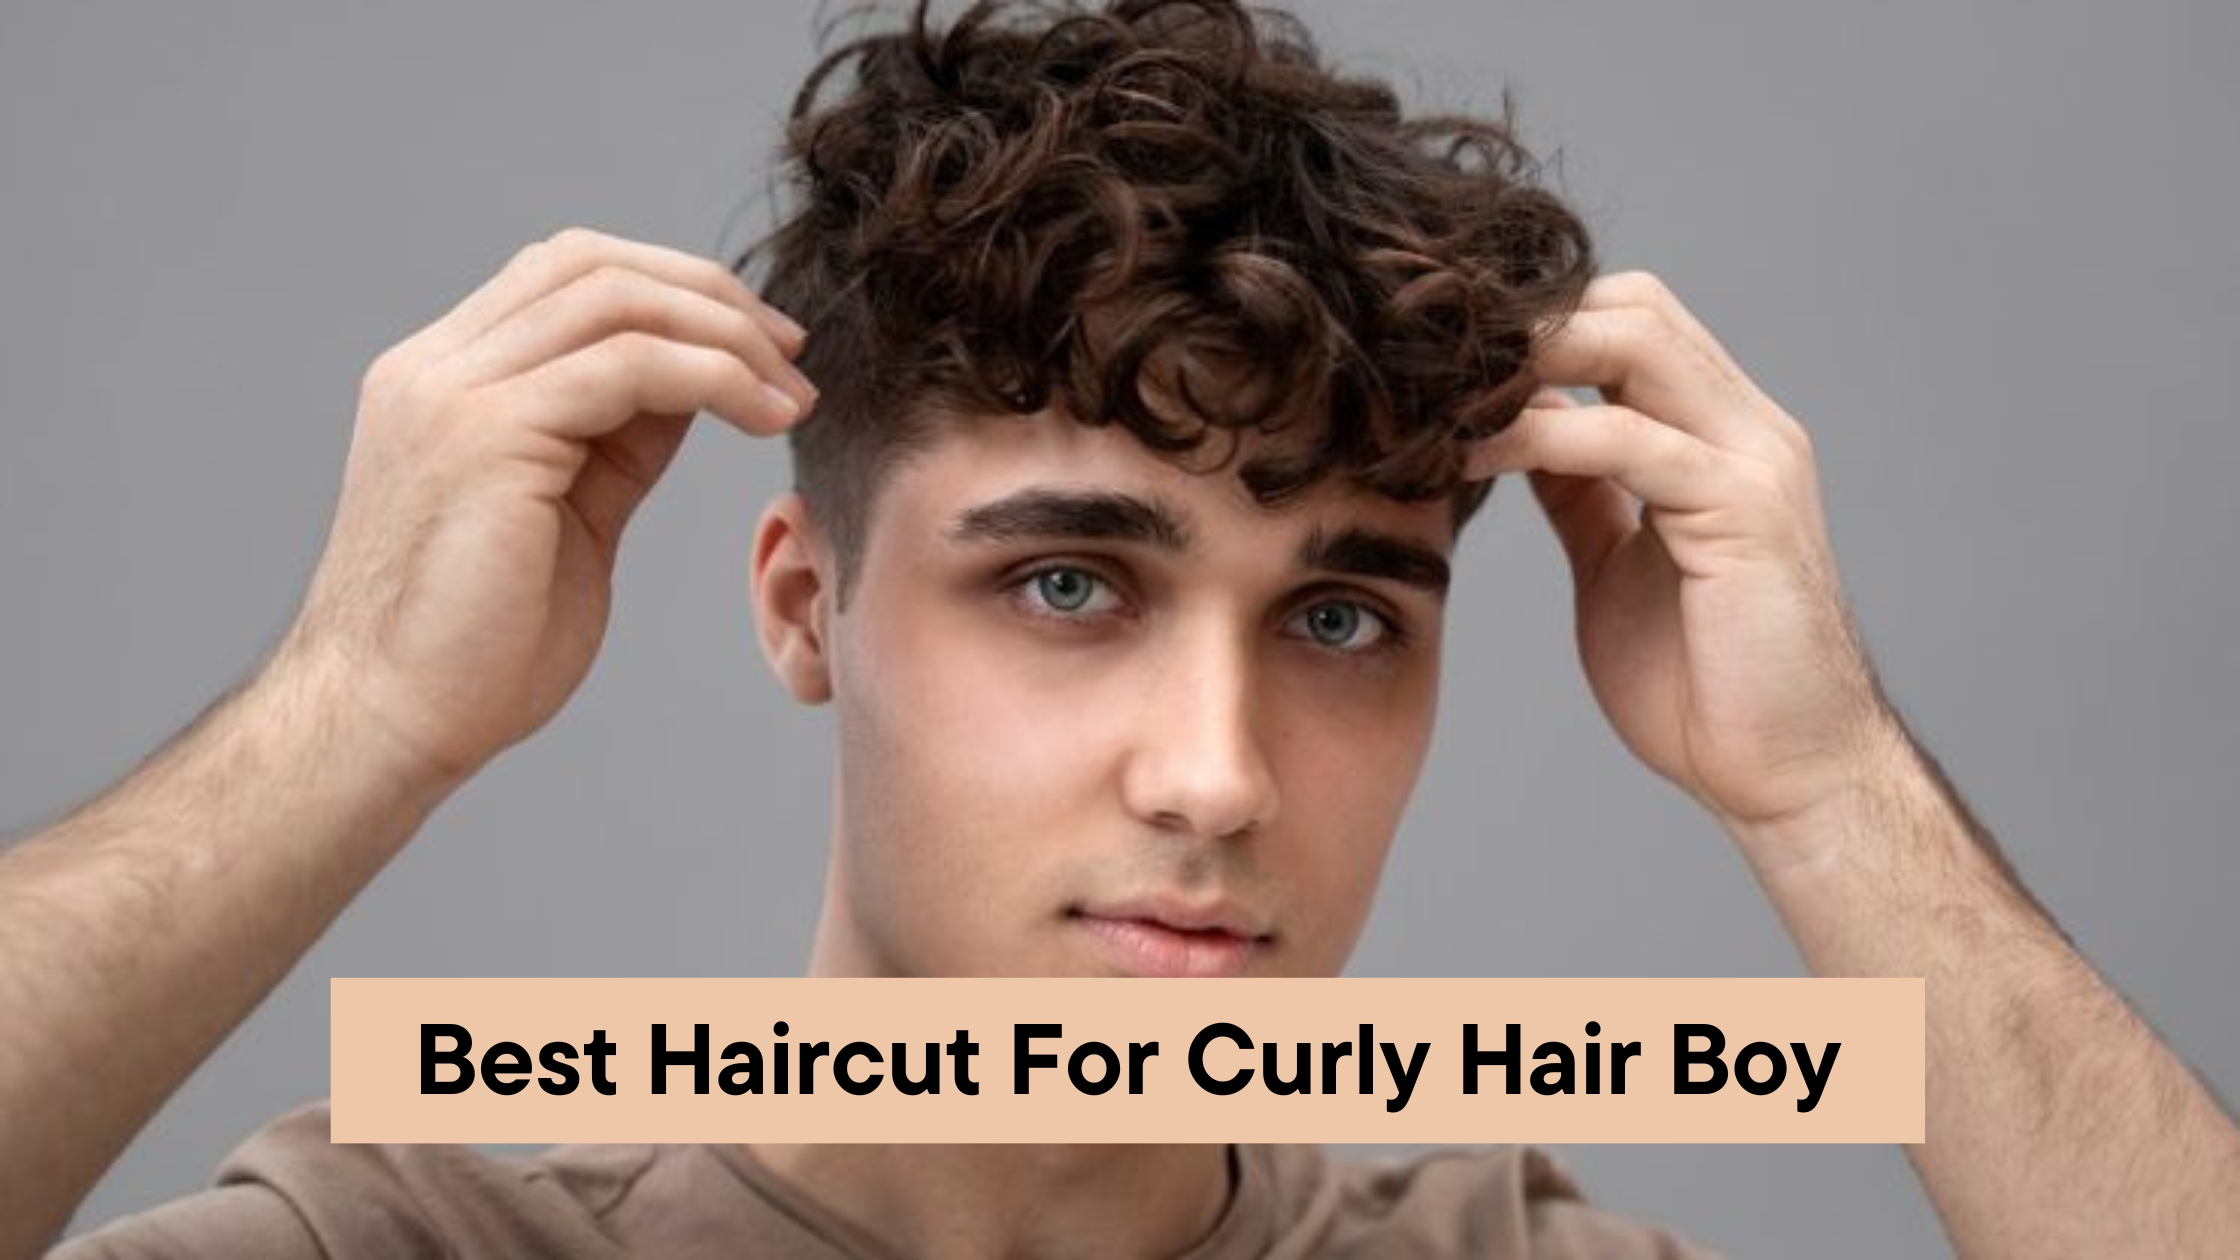 Pin by OLDCAT on Лица | Medium curly hair styles, Long hair styles men,  Haircuts for curly hair